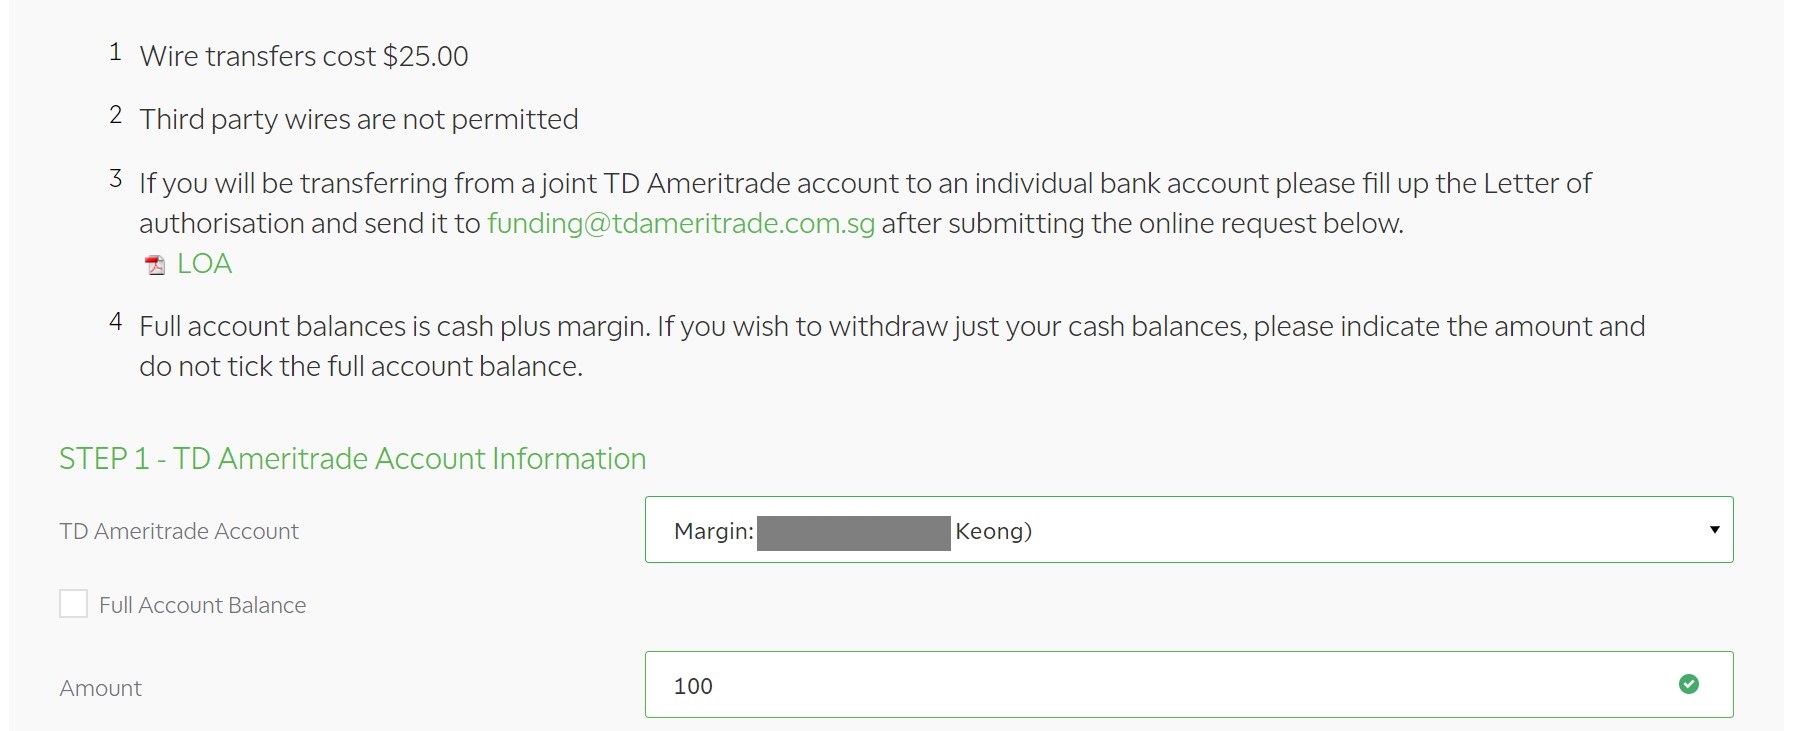 The step 1 of How to Withdraw Money from TD Ameritrade Singapore